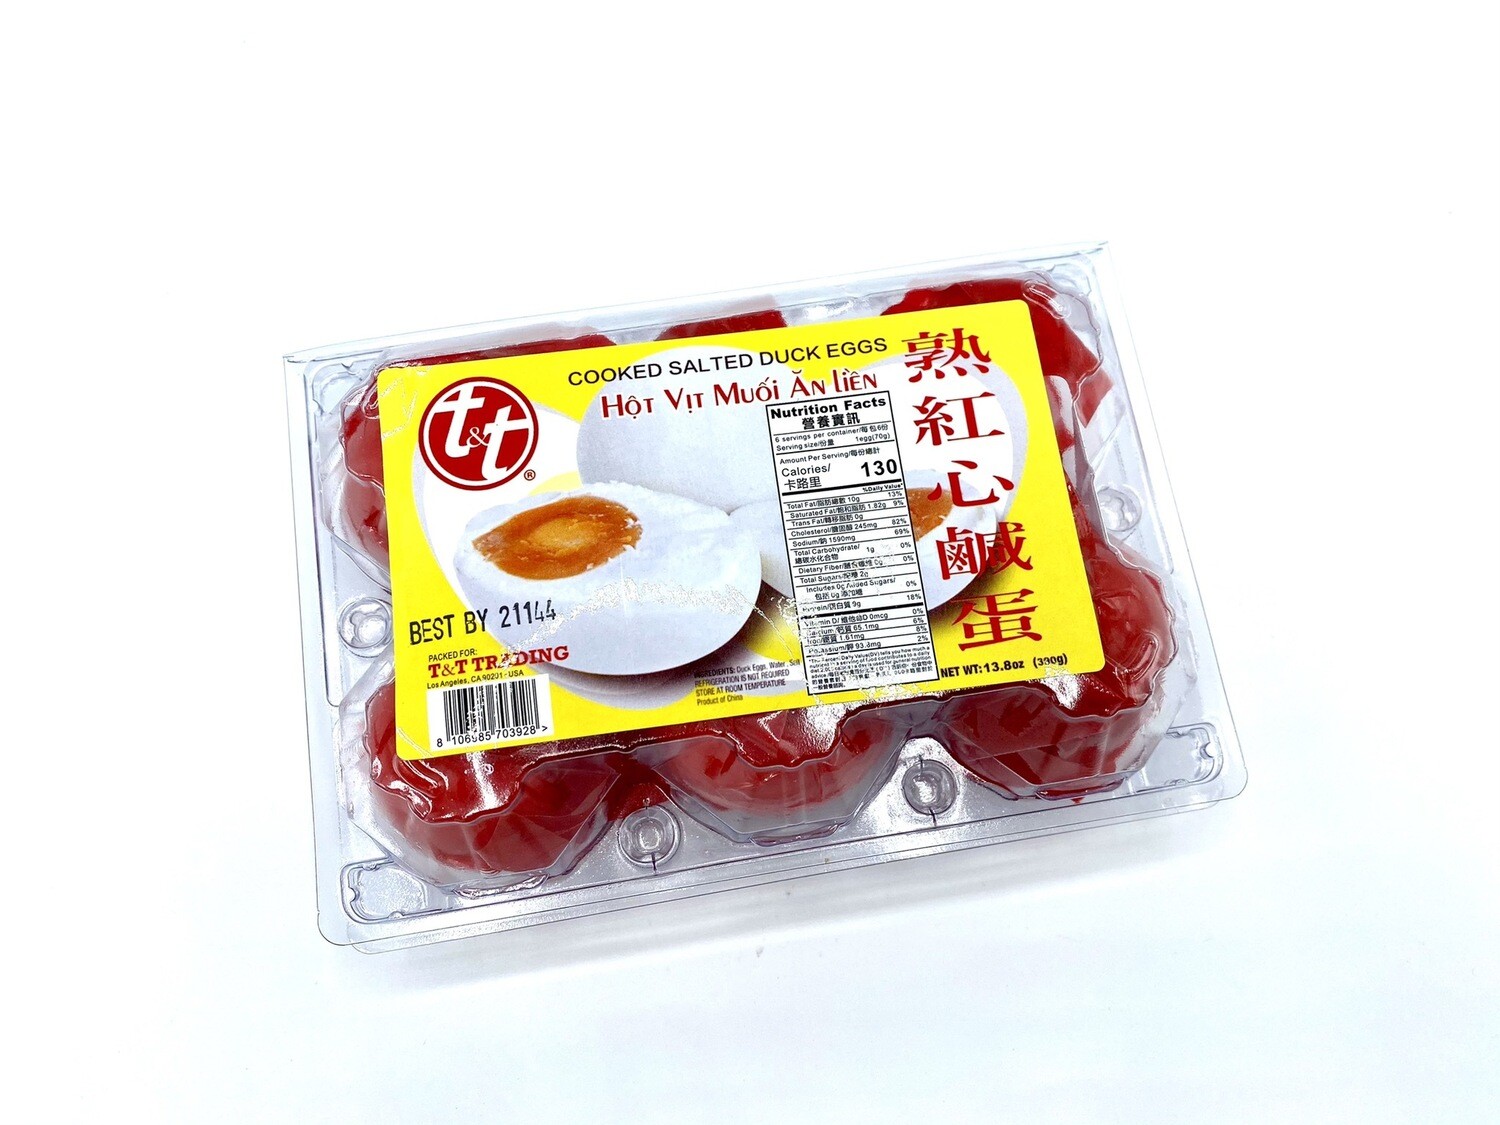 T&T Cooked Salted Duck Eggs 6 ct